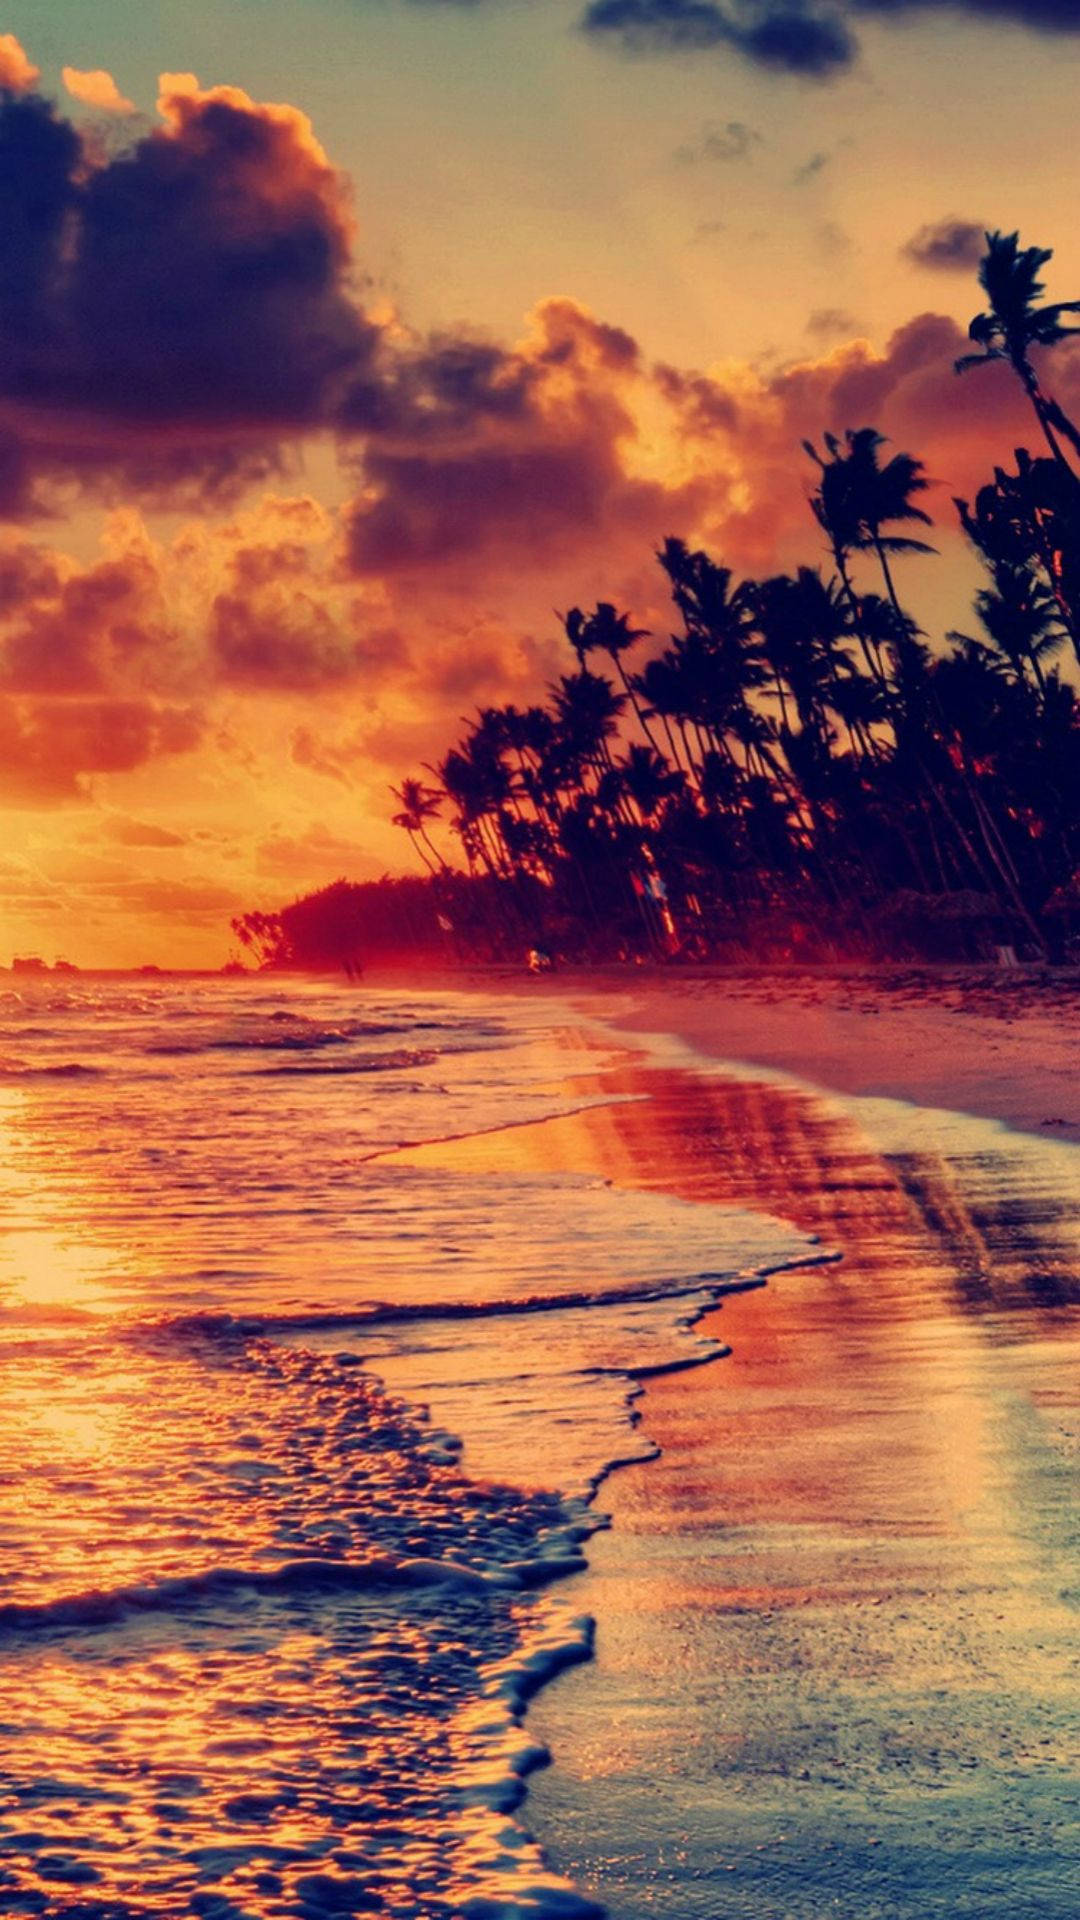 Experience the magic of nature's beautiful sunset at the beach shoreline. Wallpaper